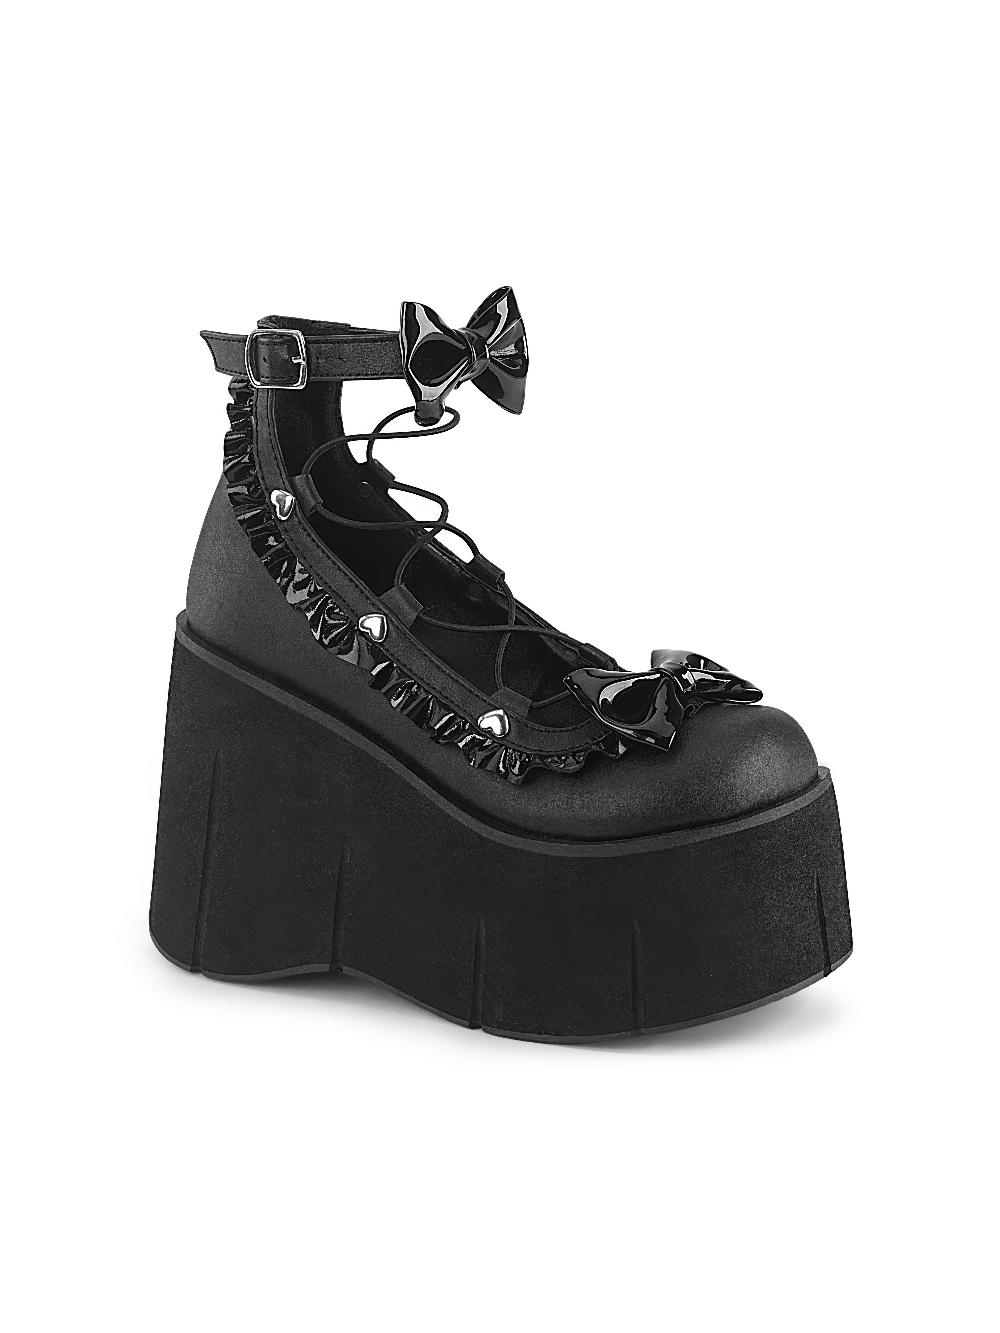 DEMONIA Platform Lolita Shoes with Bow and Ruffle Details